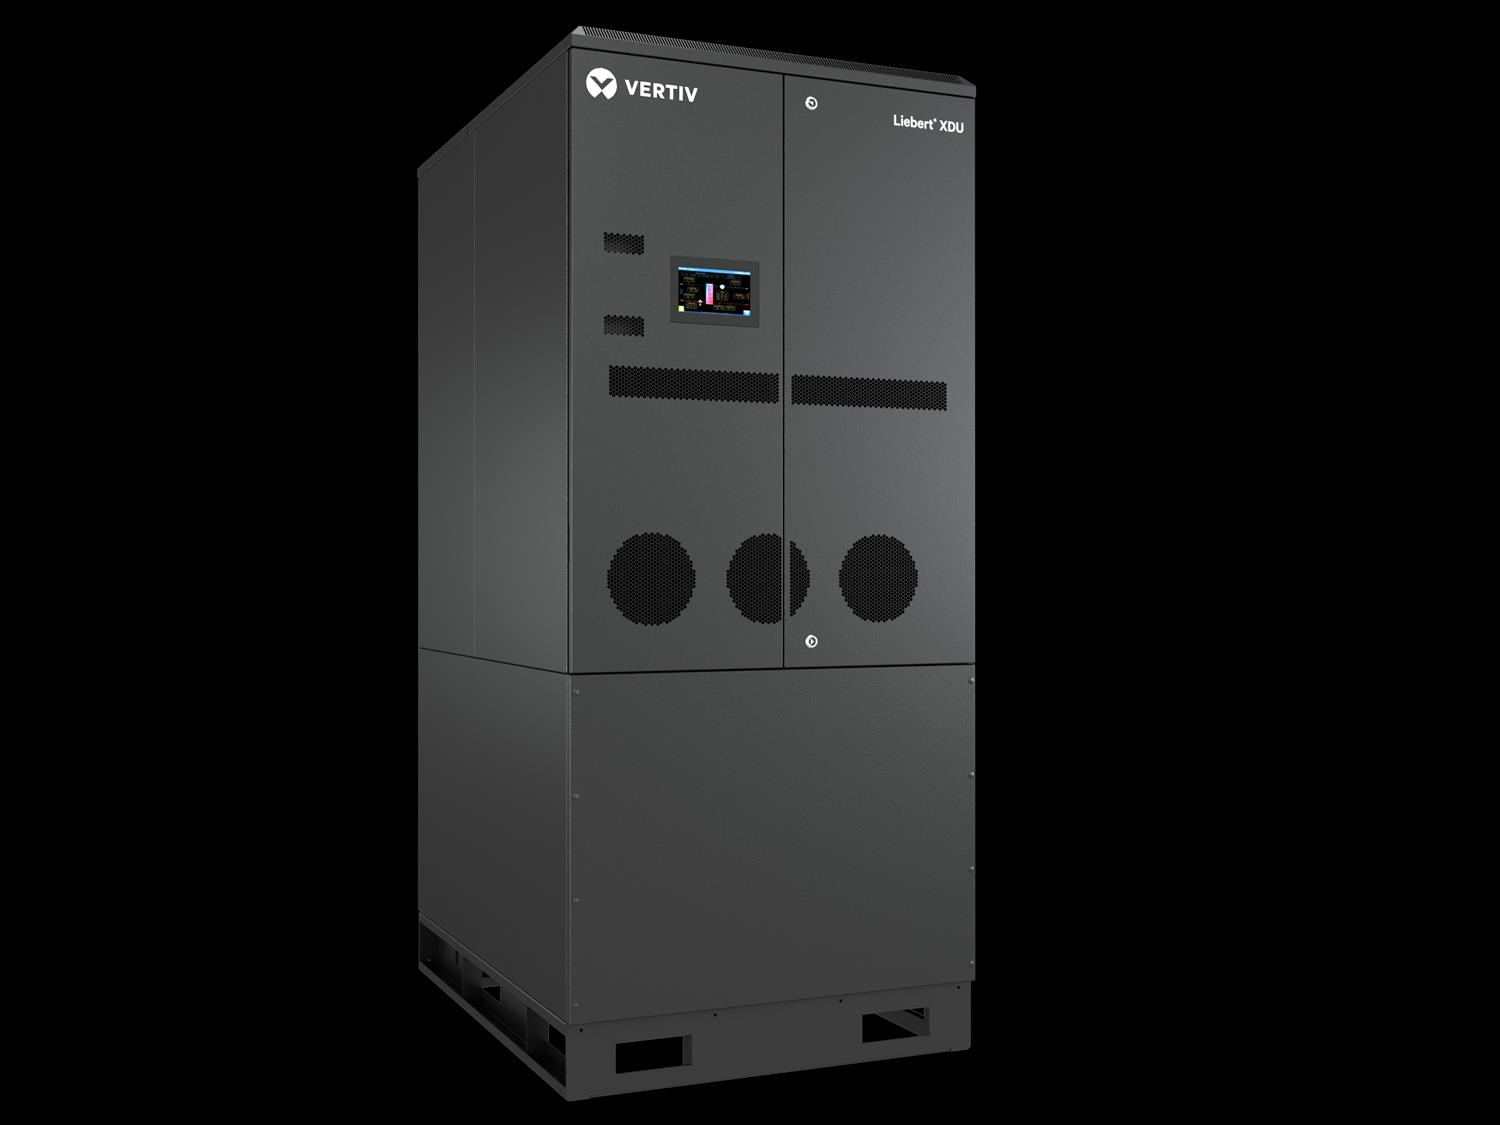 Vertiv Introduces Water-Efficient Liquid Cooling Solution For High-Density Data Centres In Europe, The Middle East And Africa (EMEA)